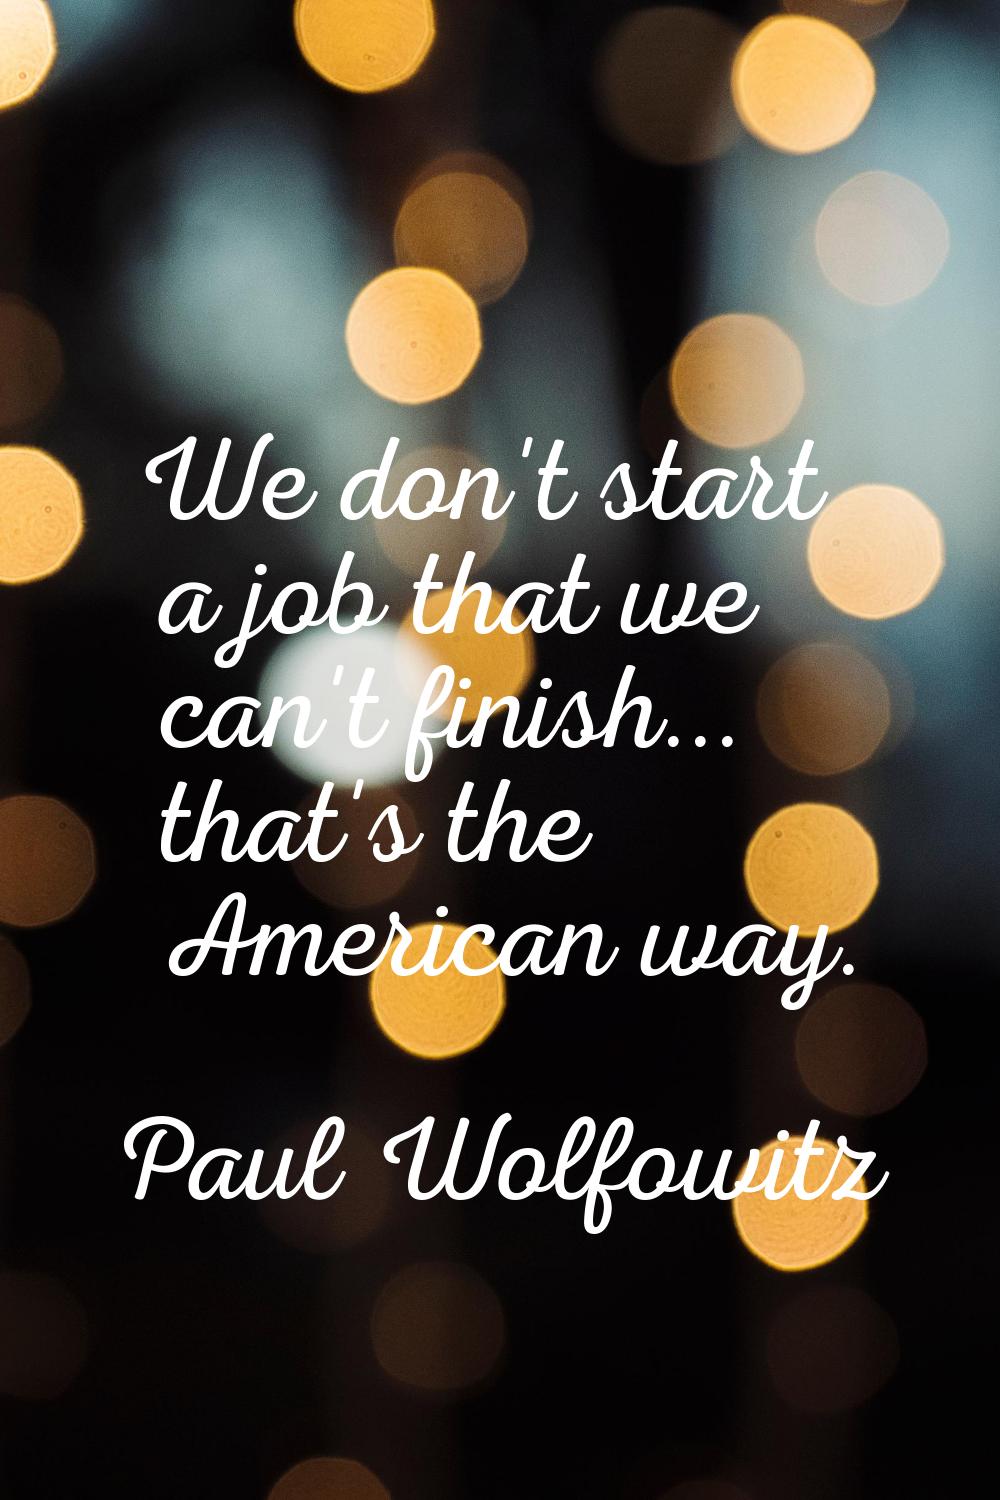 We don't start a job that we can't finish... that's the American way.